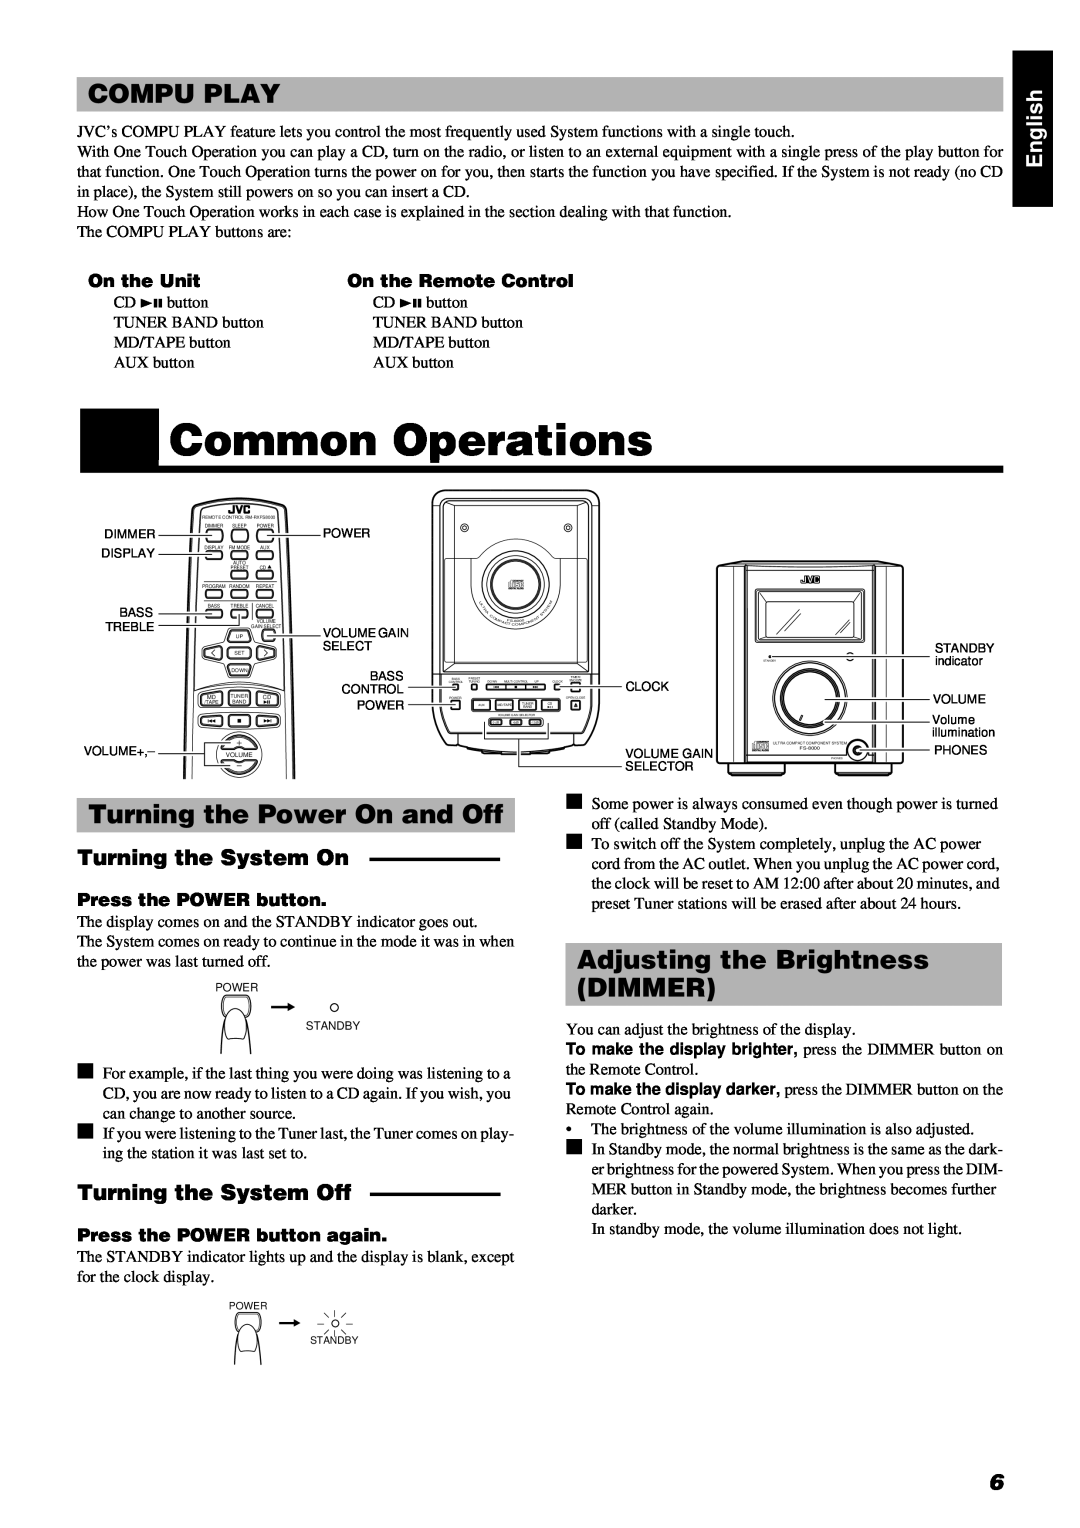 JVC FS-8000 Common Operations, Compu Play, Turning the Power On and Off, Adjusting the Brightness DIMMER, On the Unit 